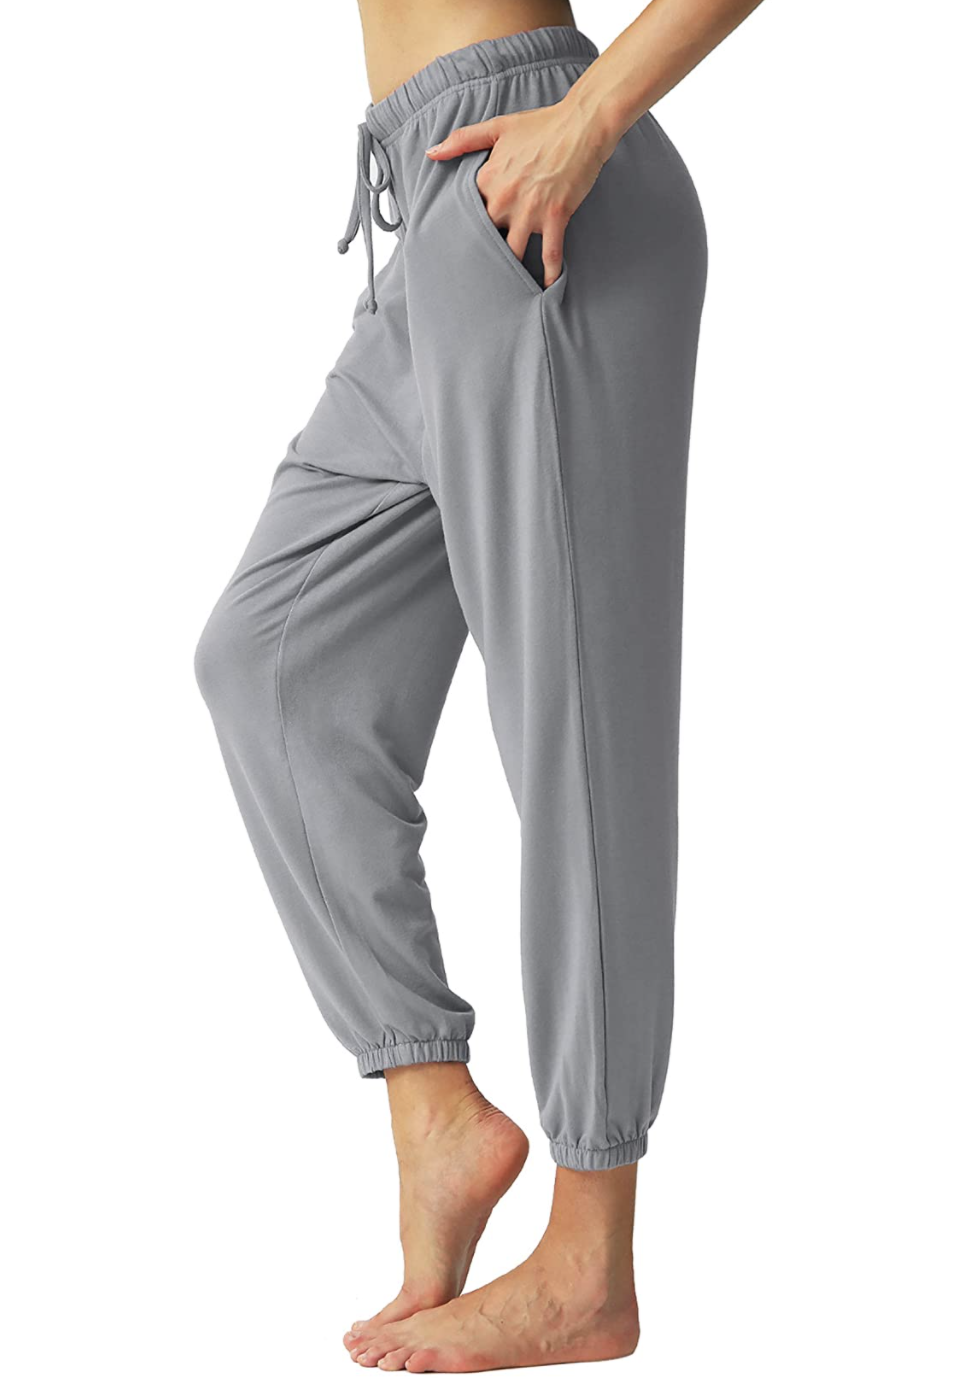 SPECIALMAGIC Women's Ankle Length Loose Yoga Cropped Sweatpants